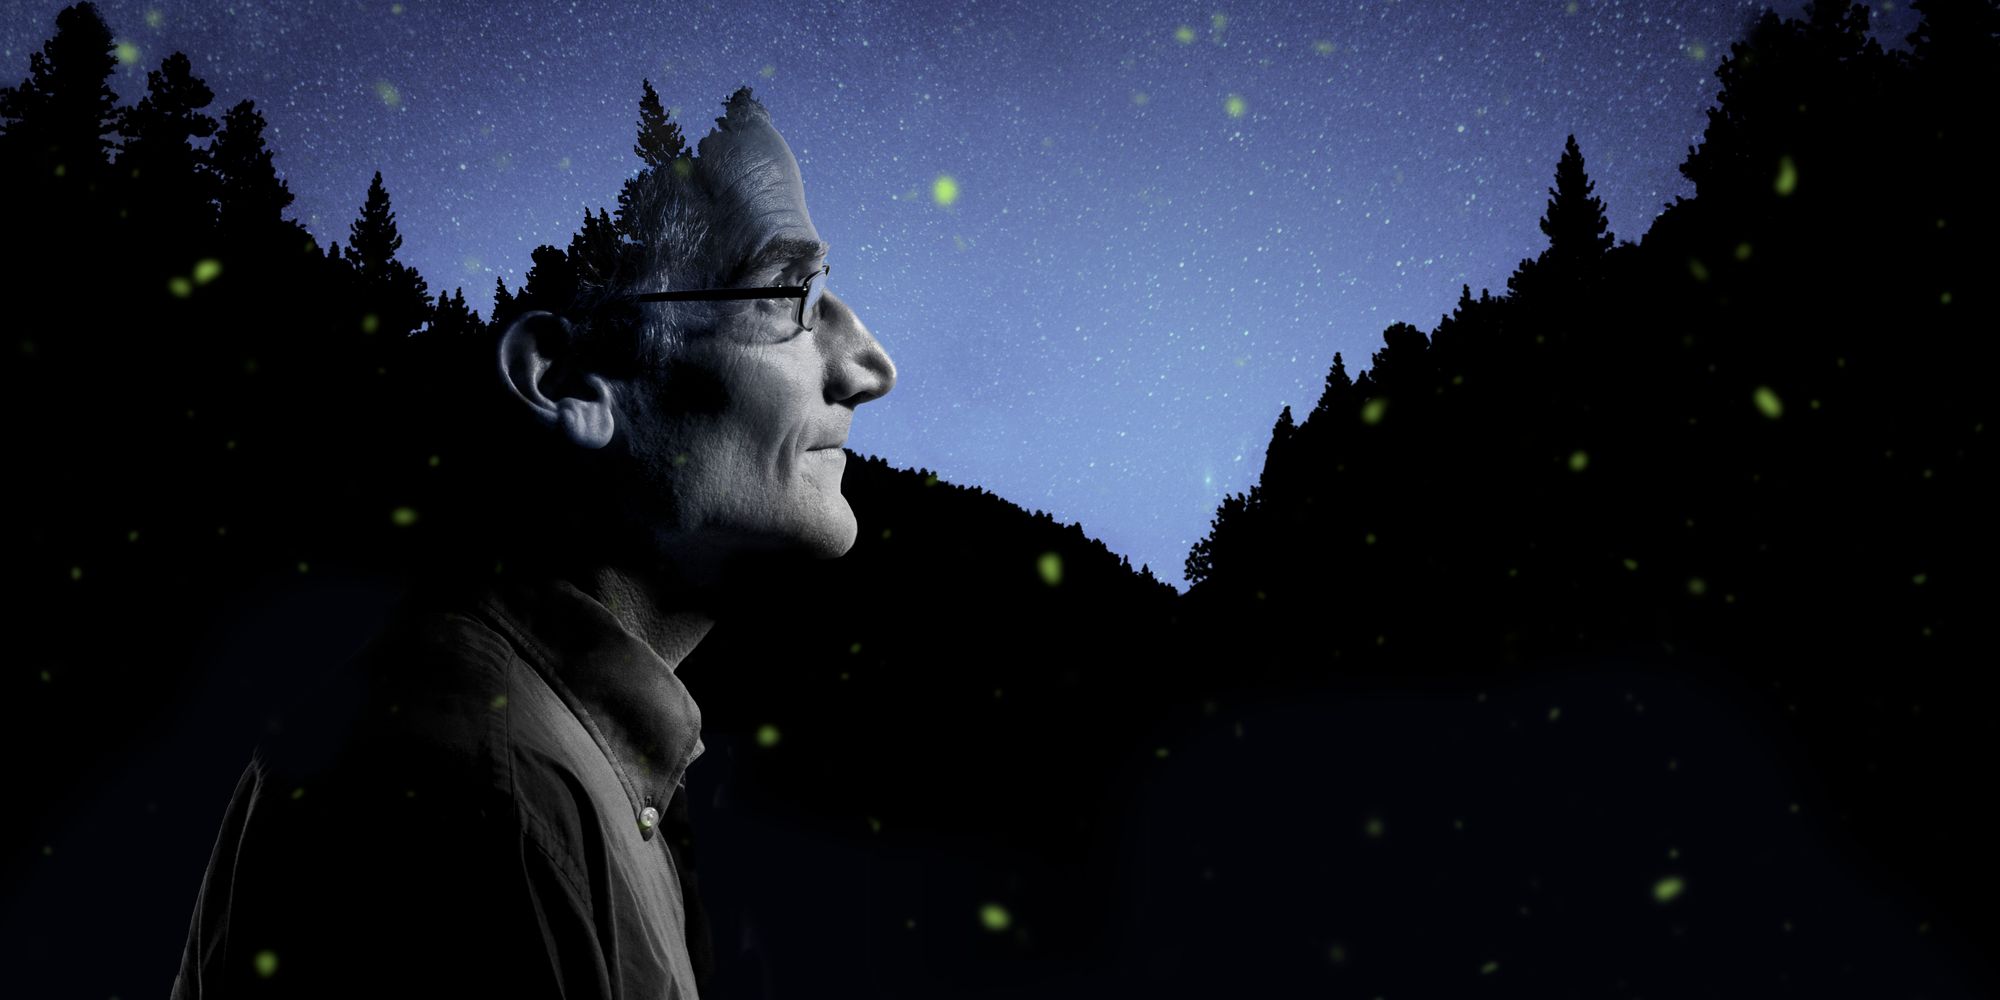 Duncan Lorimer superimposed over the night sky with fireflies in the background.